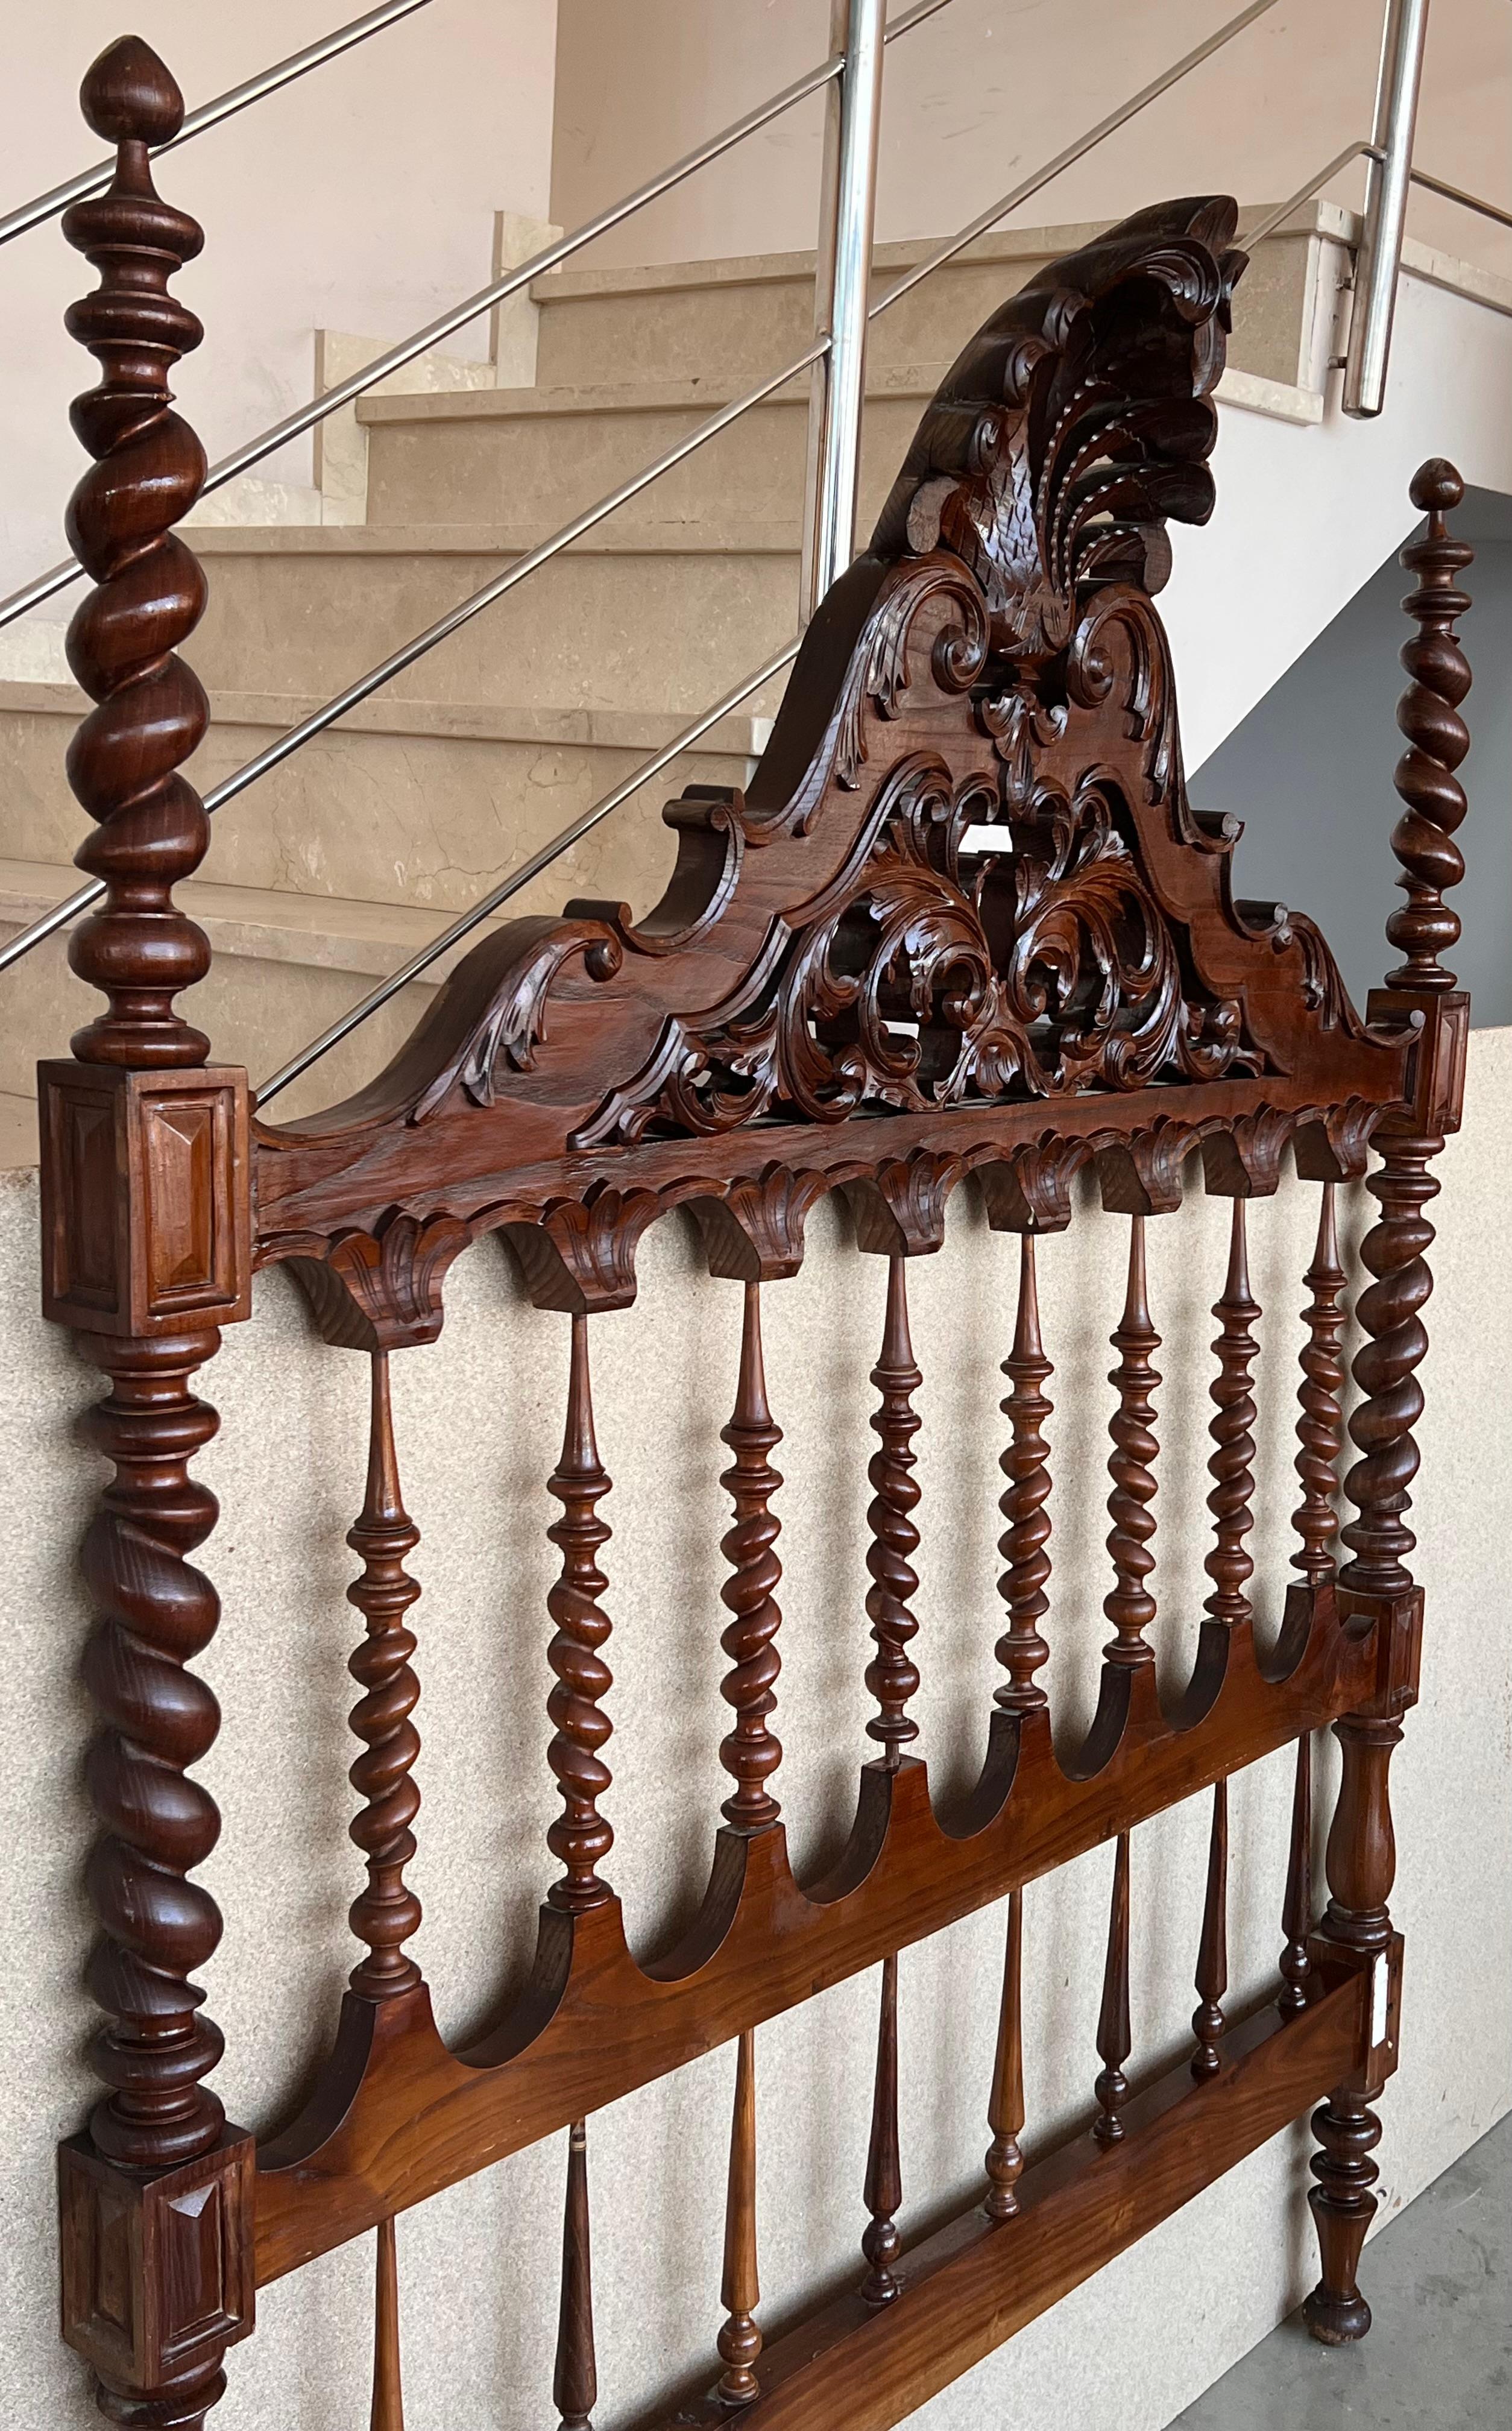 19th century Baroque bed, original Spanish bed.

This queen size 4-poster bed is handcarved with elaborate details, fluted turned post, 3D open spiral twist spindles, and Moorish details represented by the repetition of arches. It is carved and